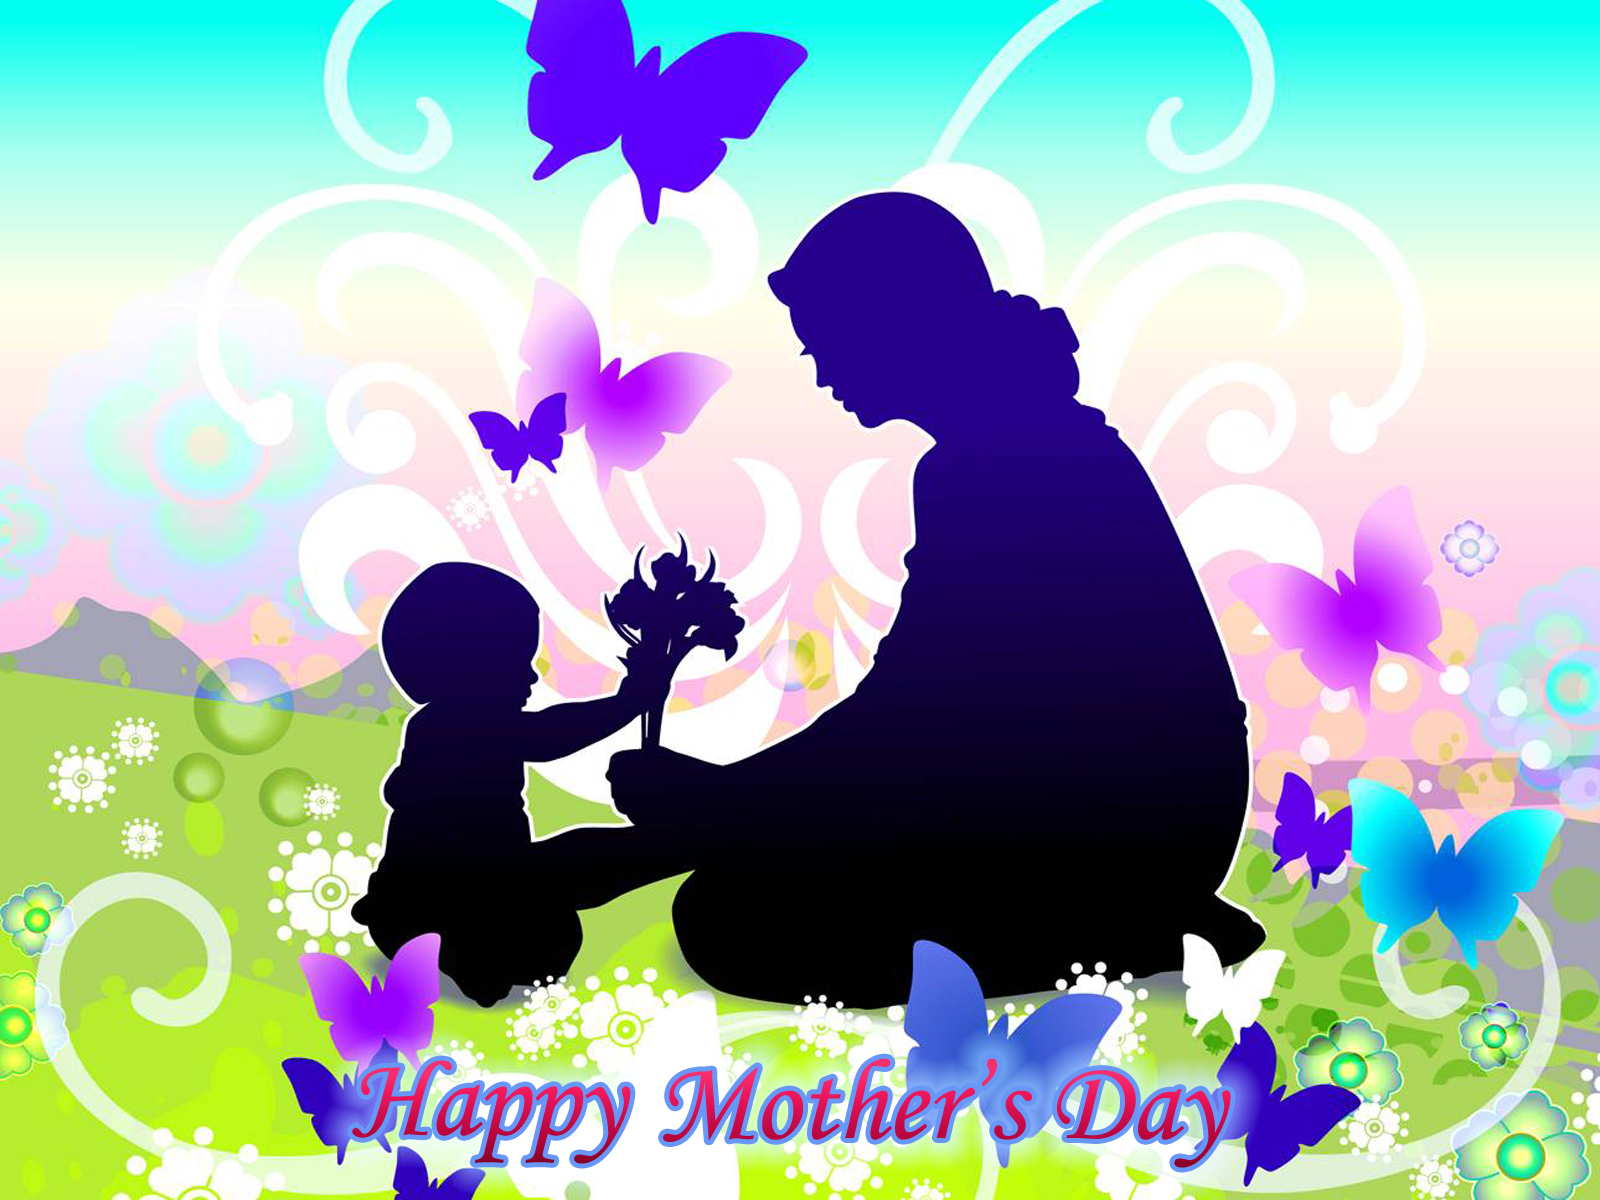 Happy Mothers Day Wallpaper On